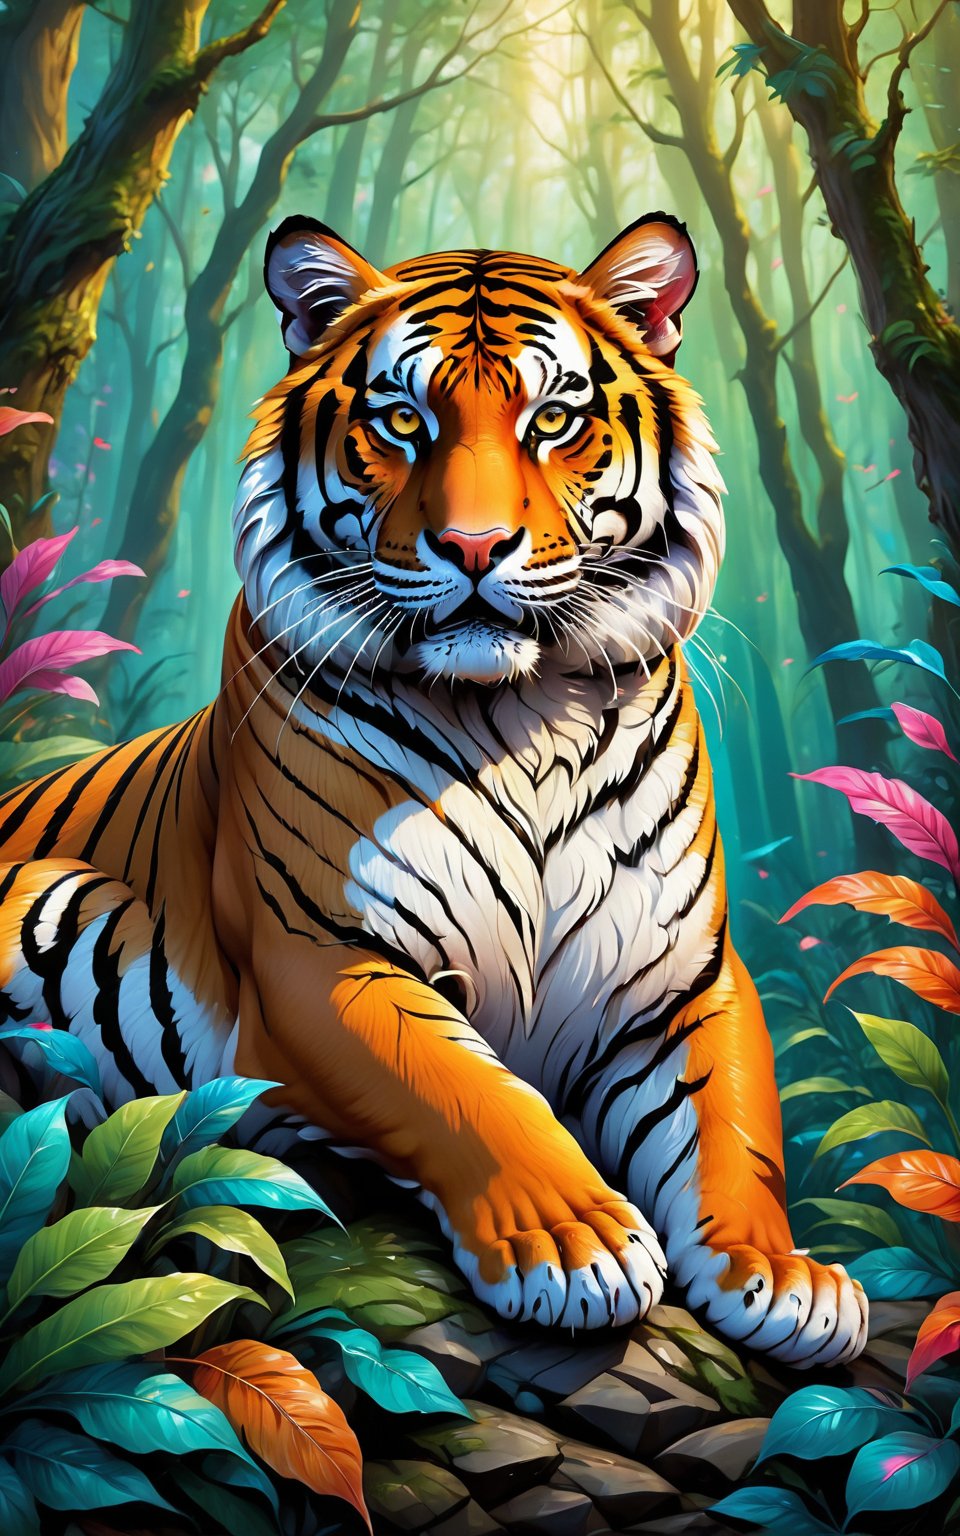 (best quality,8K,highres,masterpiece), ultra-detailed, (line drawing of a majestic tiger in a vibrant forest), a great majestic tiger in a forest setting, rendered in a super realistic line drawing style with vibrant colors and many details. The tiger's powerful presence is captured with meticulous attention to detail, from the intricate patterns of its fur to the intensity of its gaze. Surrounding the tiger is a lush forest filled with vibrant colors, adding depth and richness to the scene. The combination of realism and vibrant colors creates a visually stunning and captivating portrayal of the majestic tiger in its natural habitat.